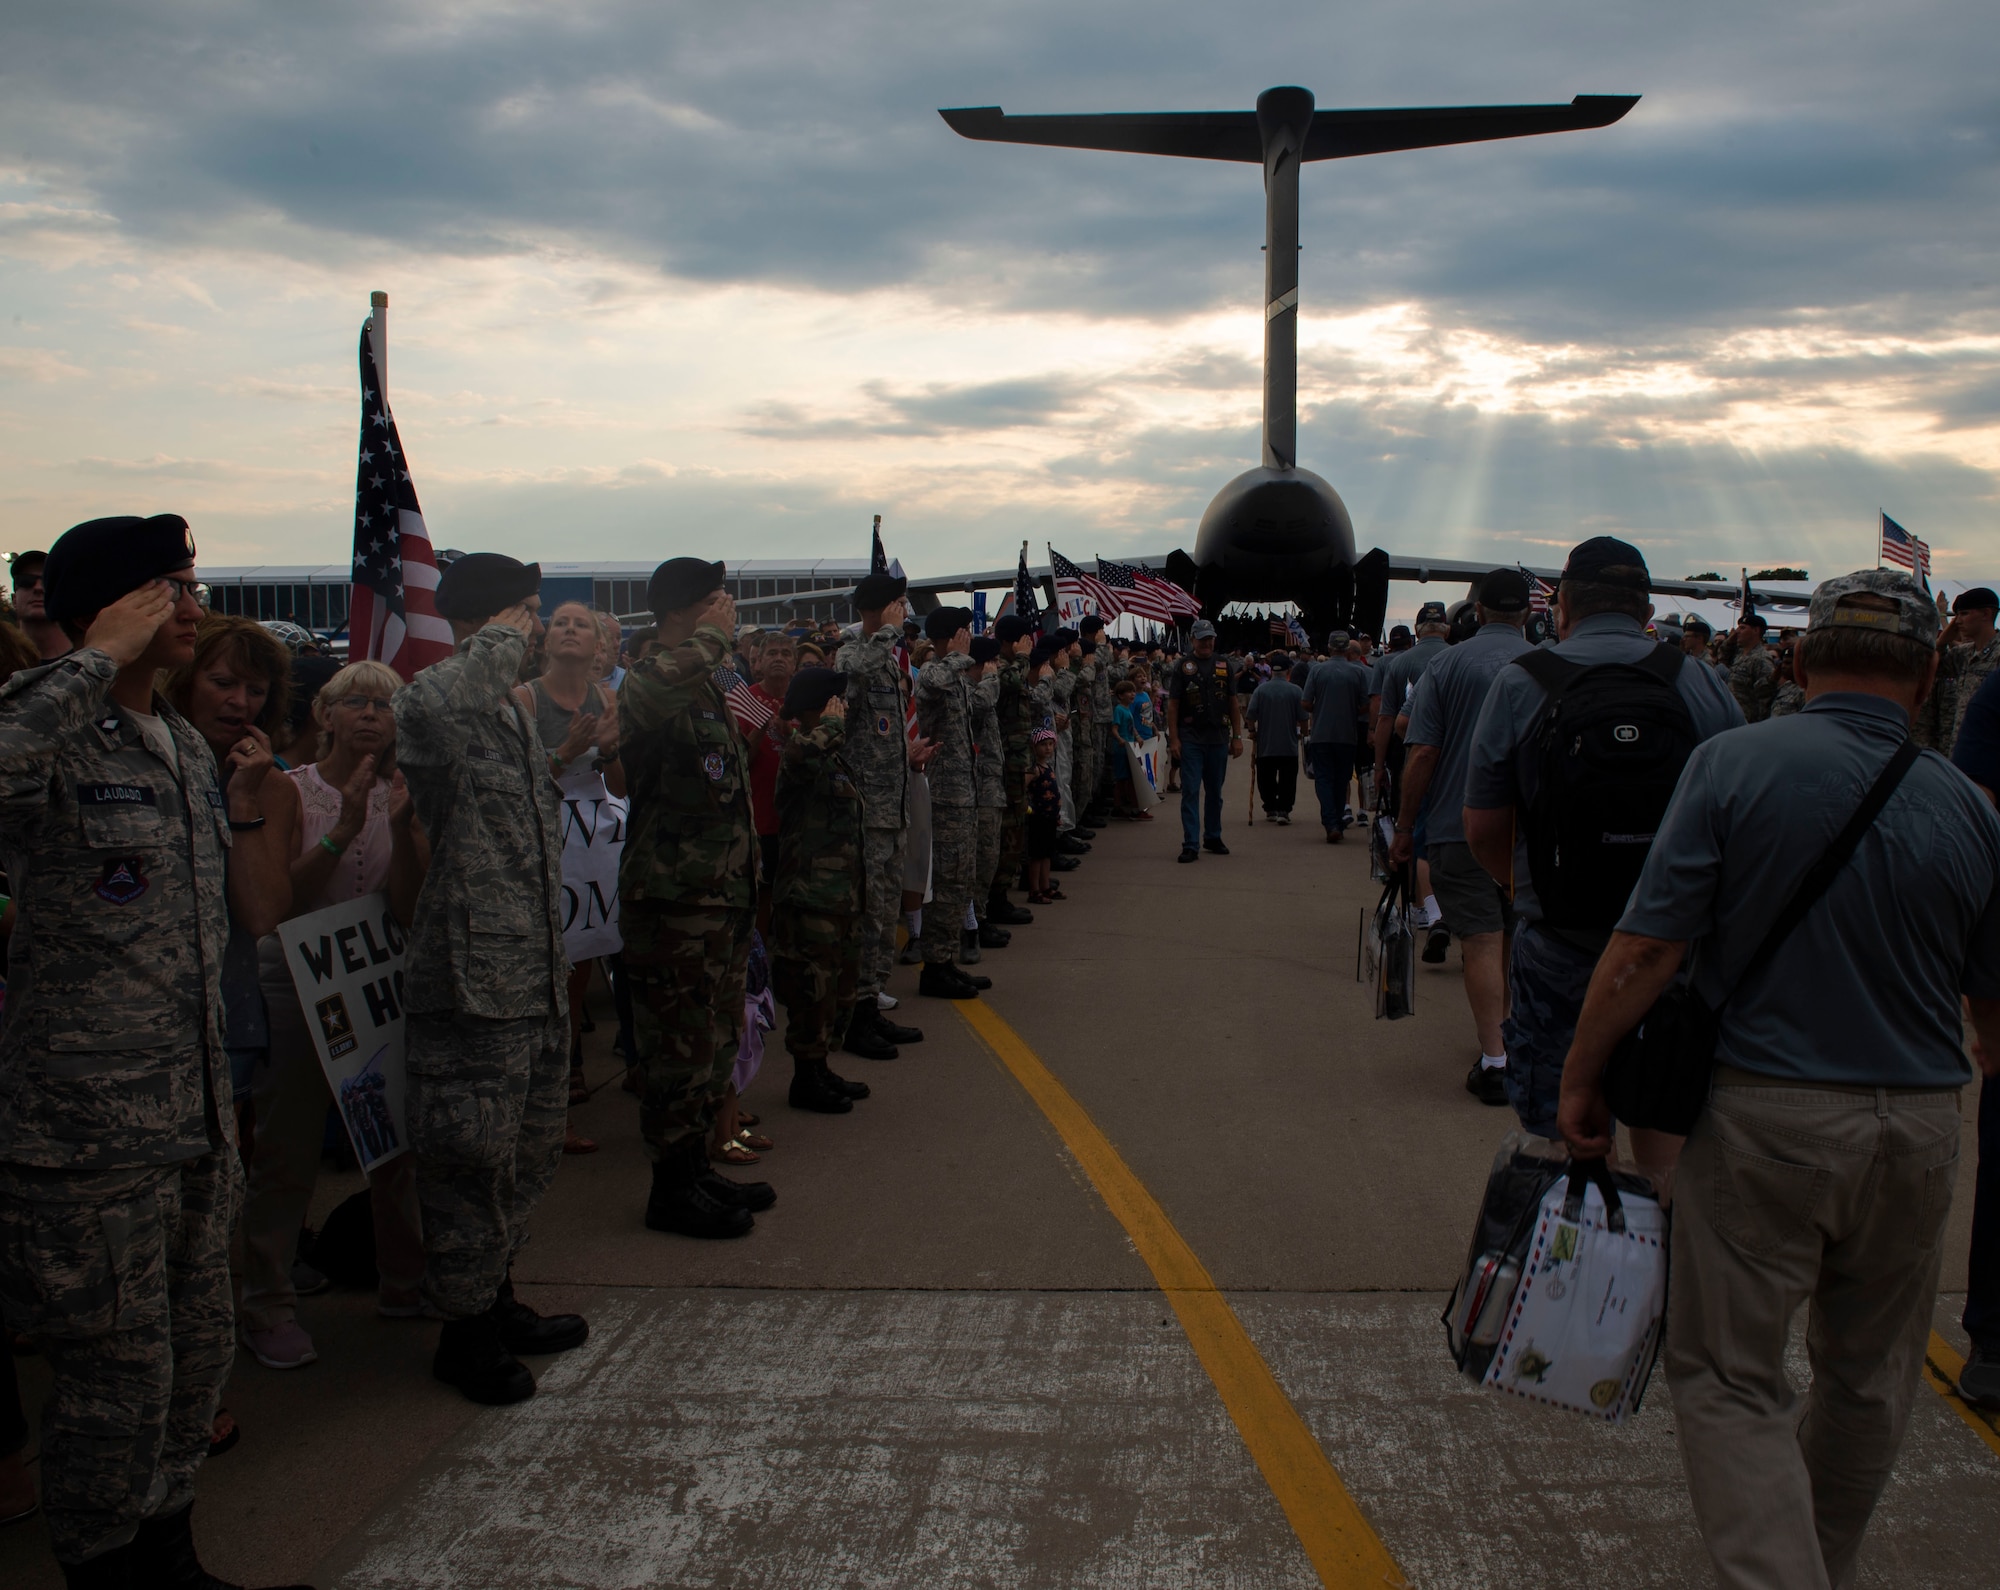 The Old Glory Honor Flight salute and give a welcoming home to veterans who served in the Vietnam War behind a C-5M Super Galaxy July 26, 2019, at Whitman Regional Airport in Oshkosh, Wisconsin. The C-5 crew went to EAA AirVenture 2019 where more than 500,000 aviation enthusiasts from 80 countries gathered at the air show to celebrate the past, present and future in the world of aviation. (U.S. Air Force photo by Senior Airman Jonathon Carnell)